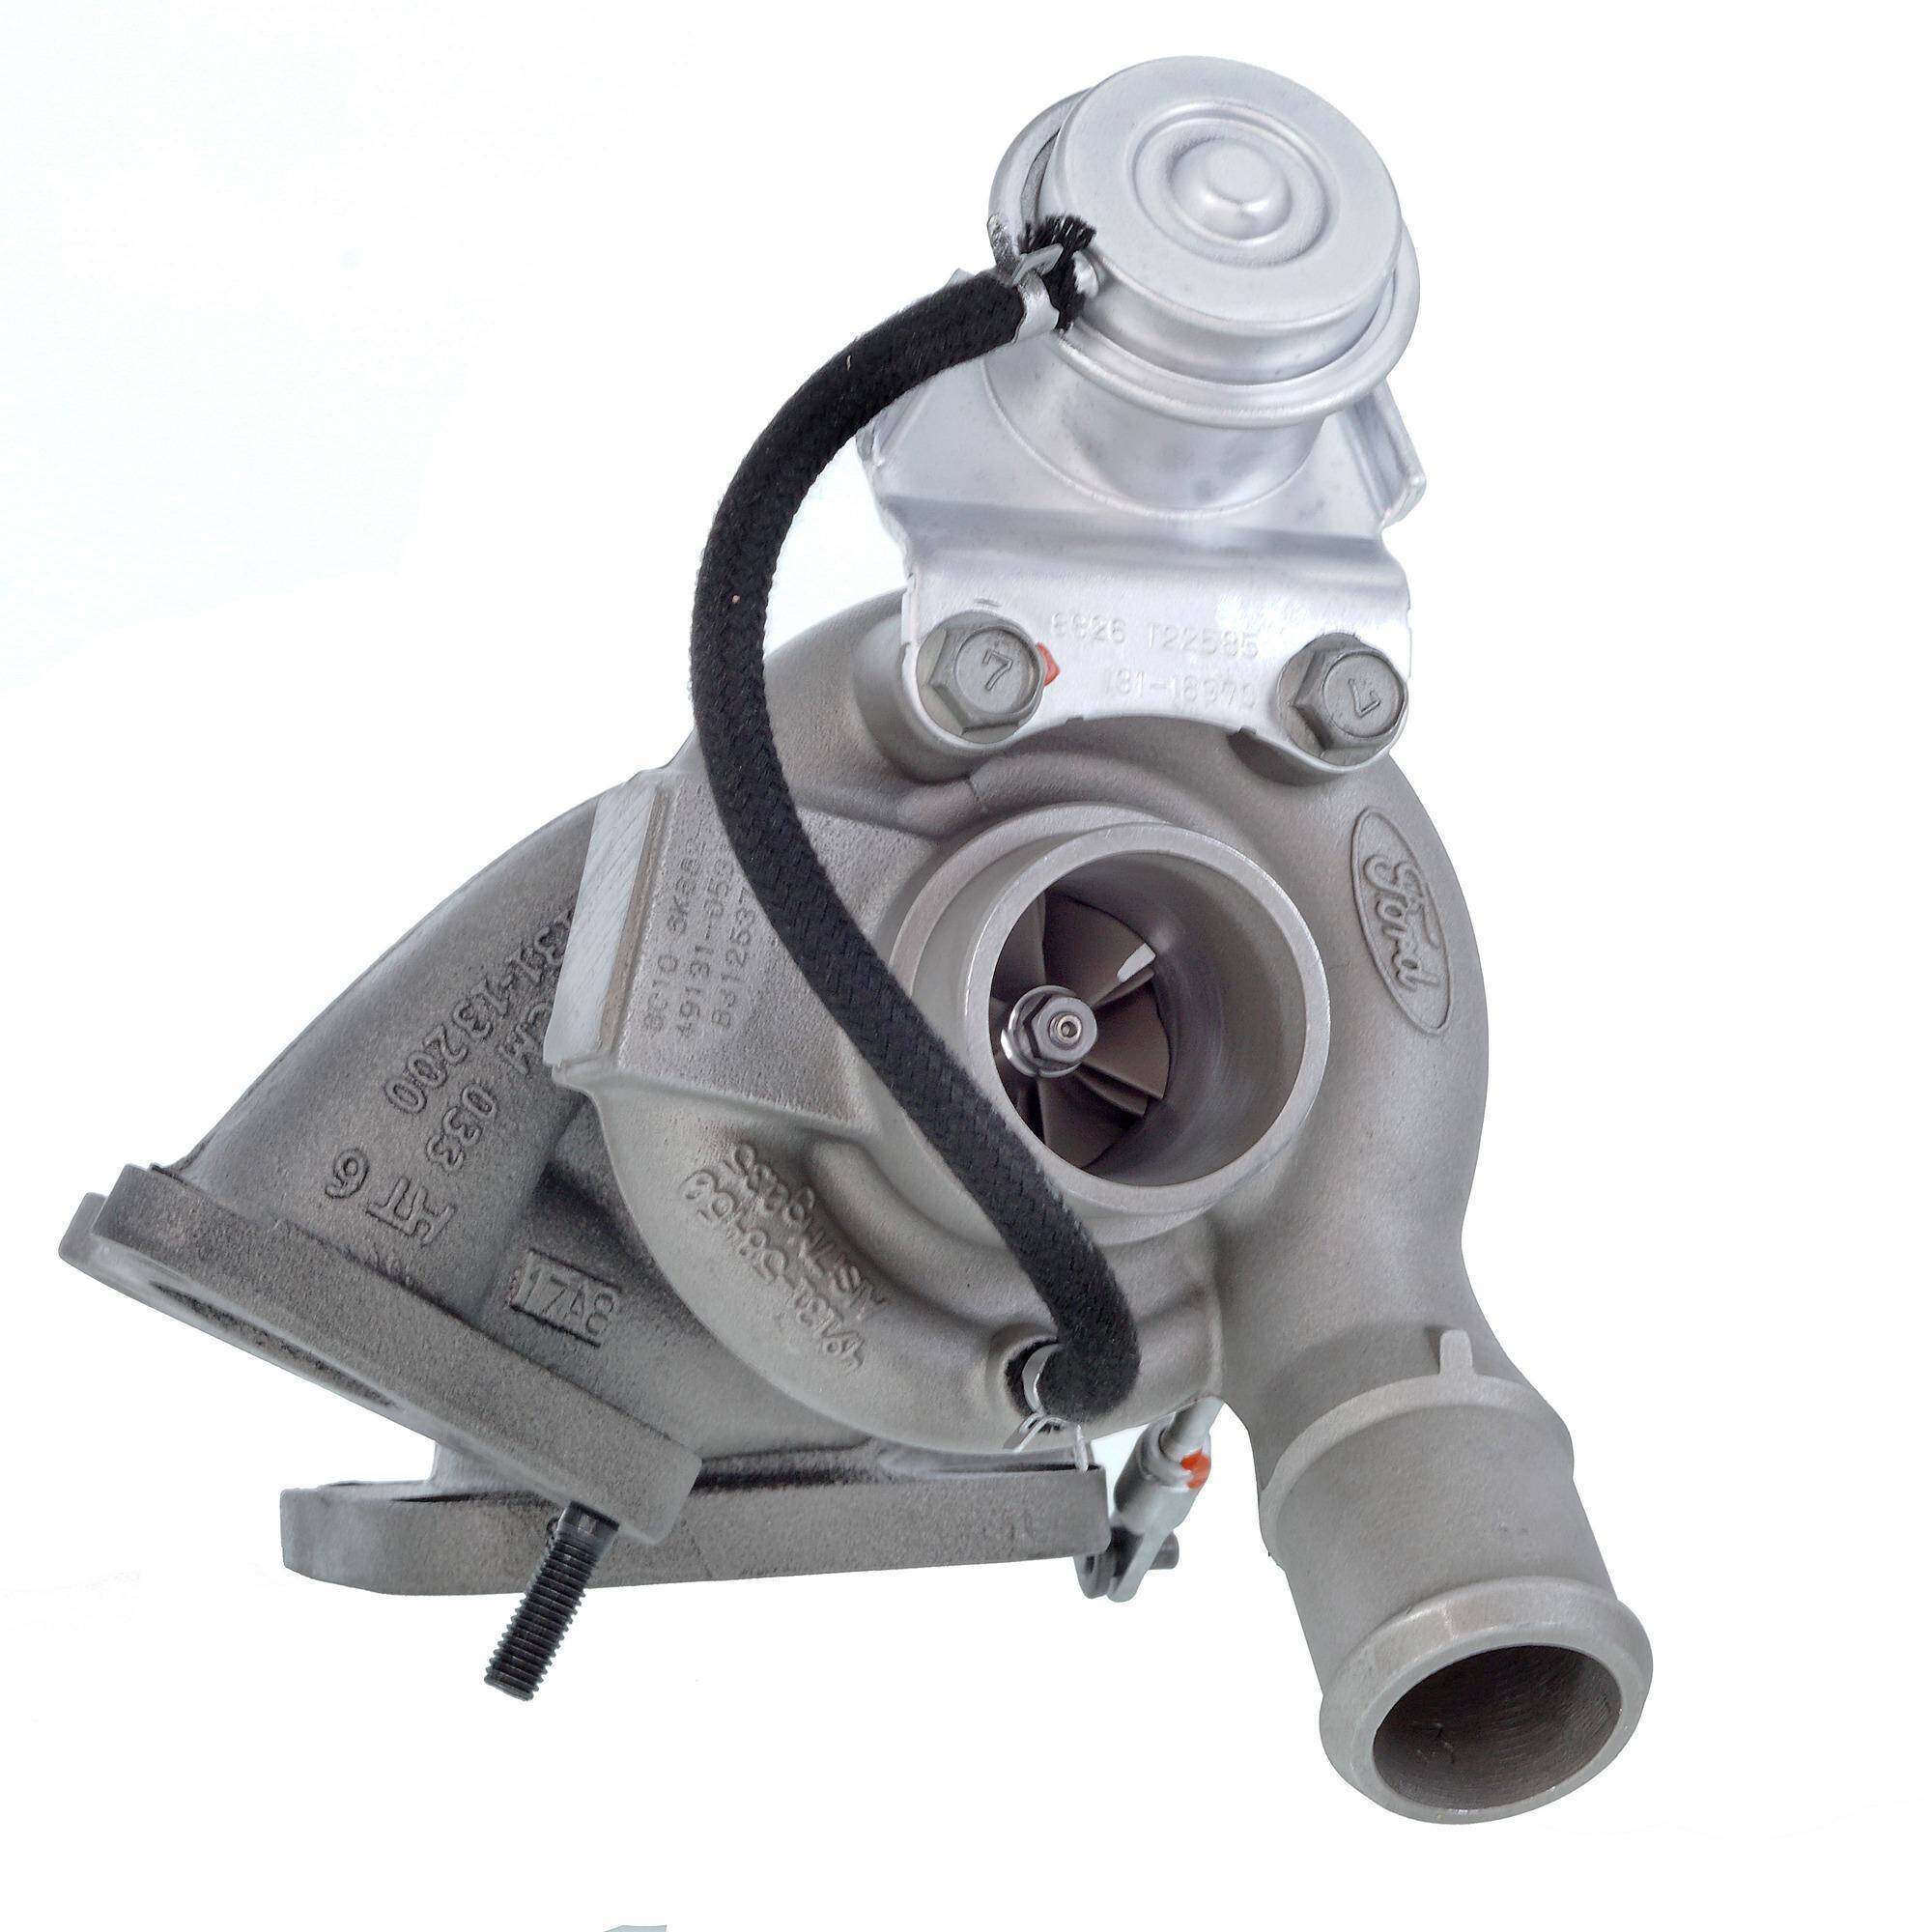 TURBOCHARGER TURBO REMANUFACTURED 49131-05313 49131-05312 49131-05313